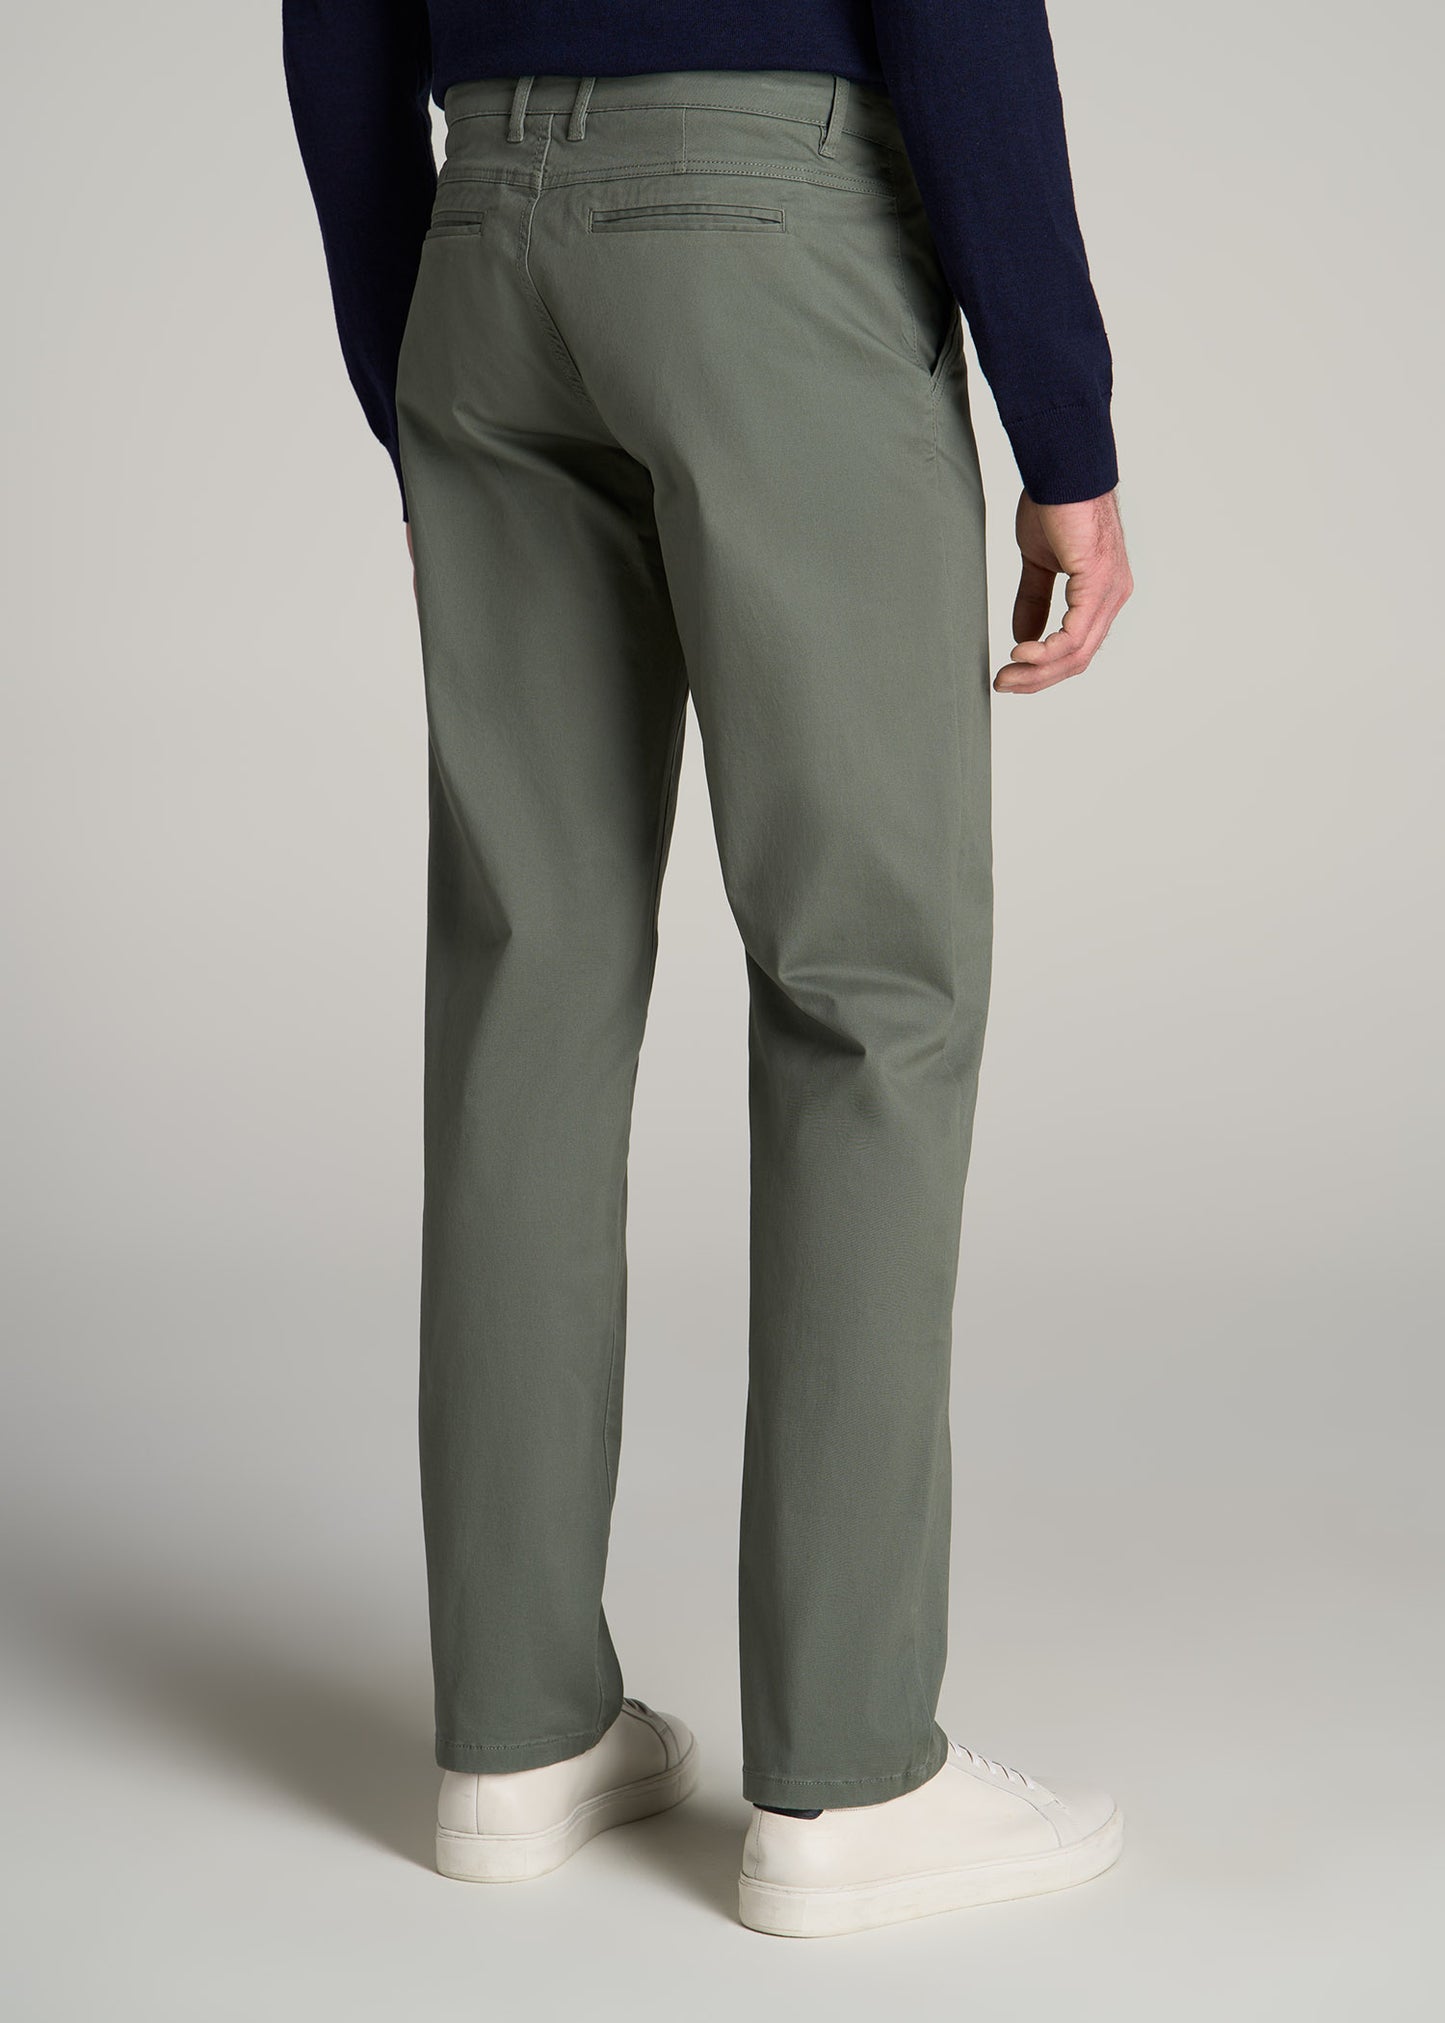 Mason SEMI-RELAXED Chinos in Wreath Green - Pants for Tall Men